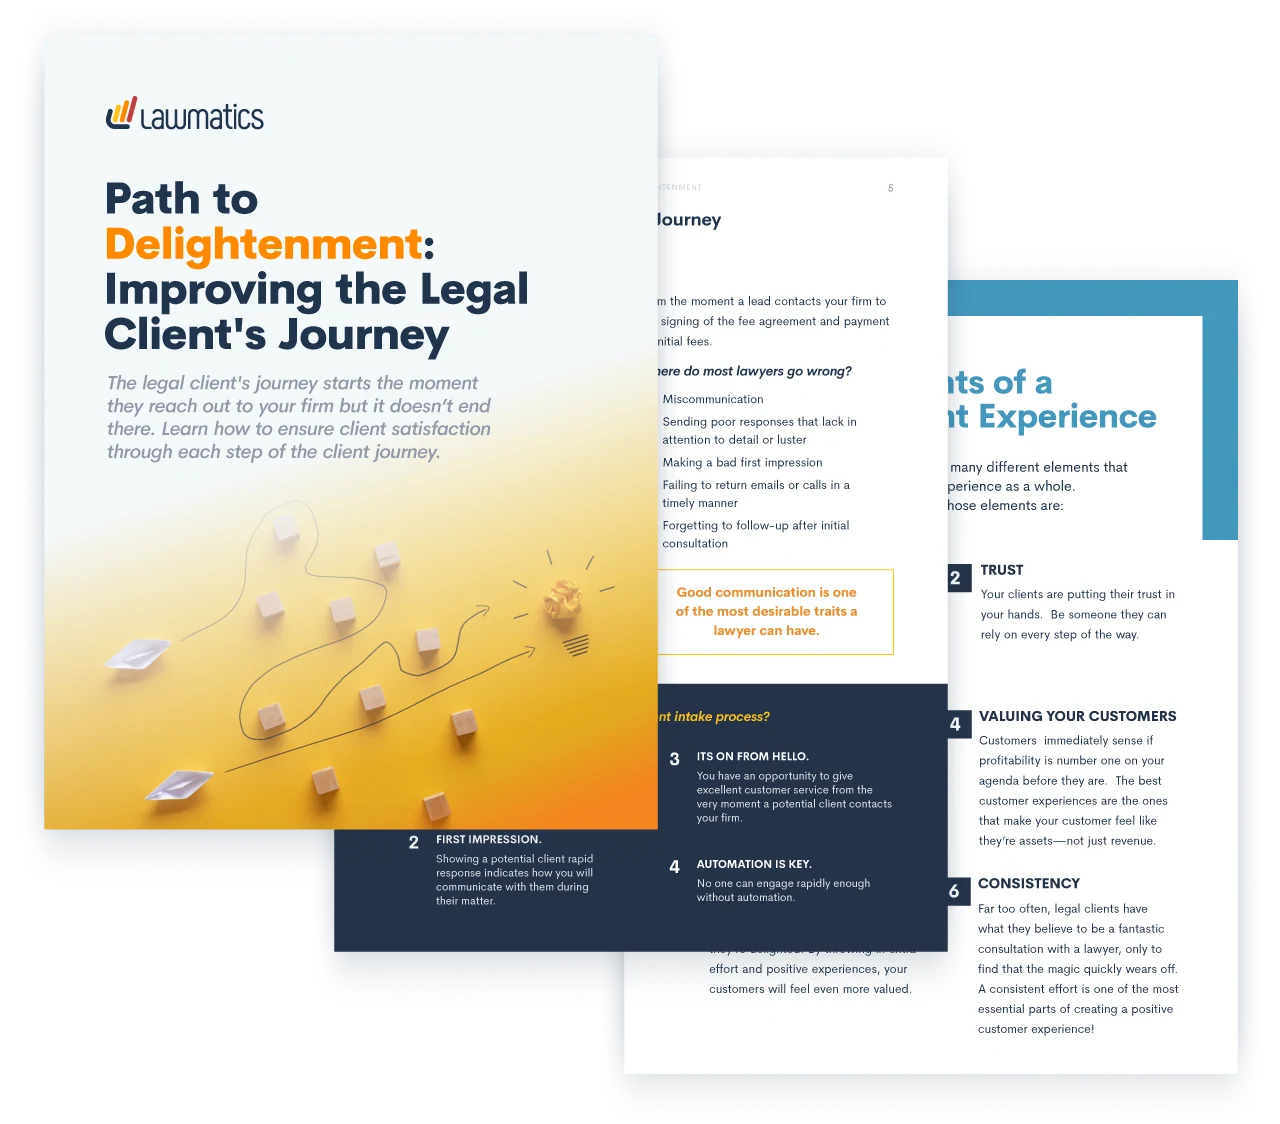 Path to Delightenment: Improving the Legal Client's Journey